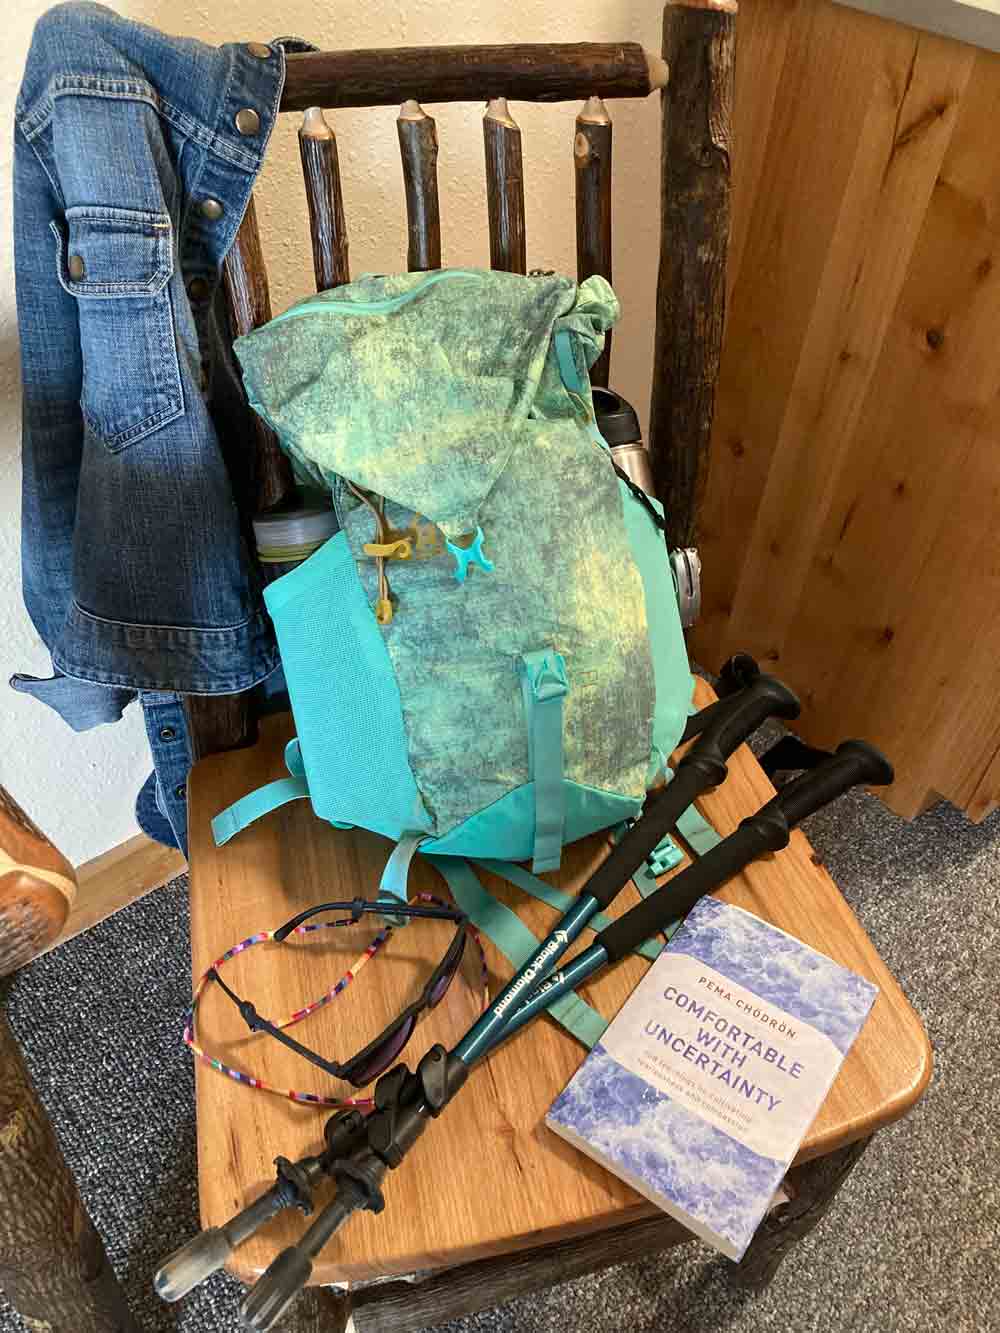 Backpack, hiking poles, glasses, book, jean jacket on chair